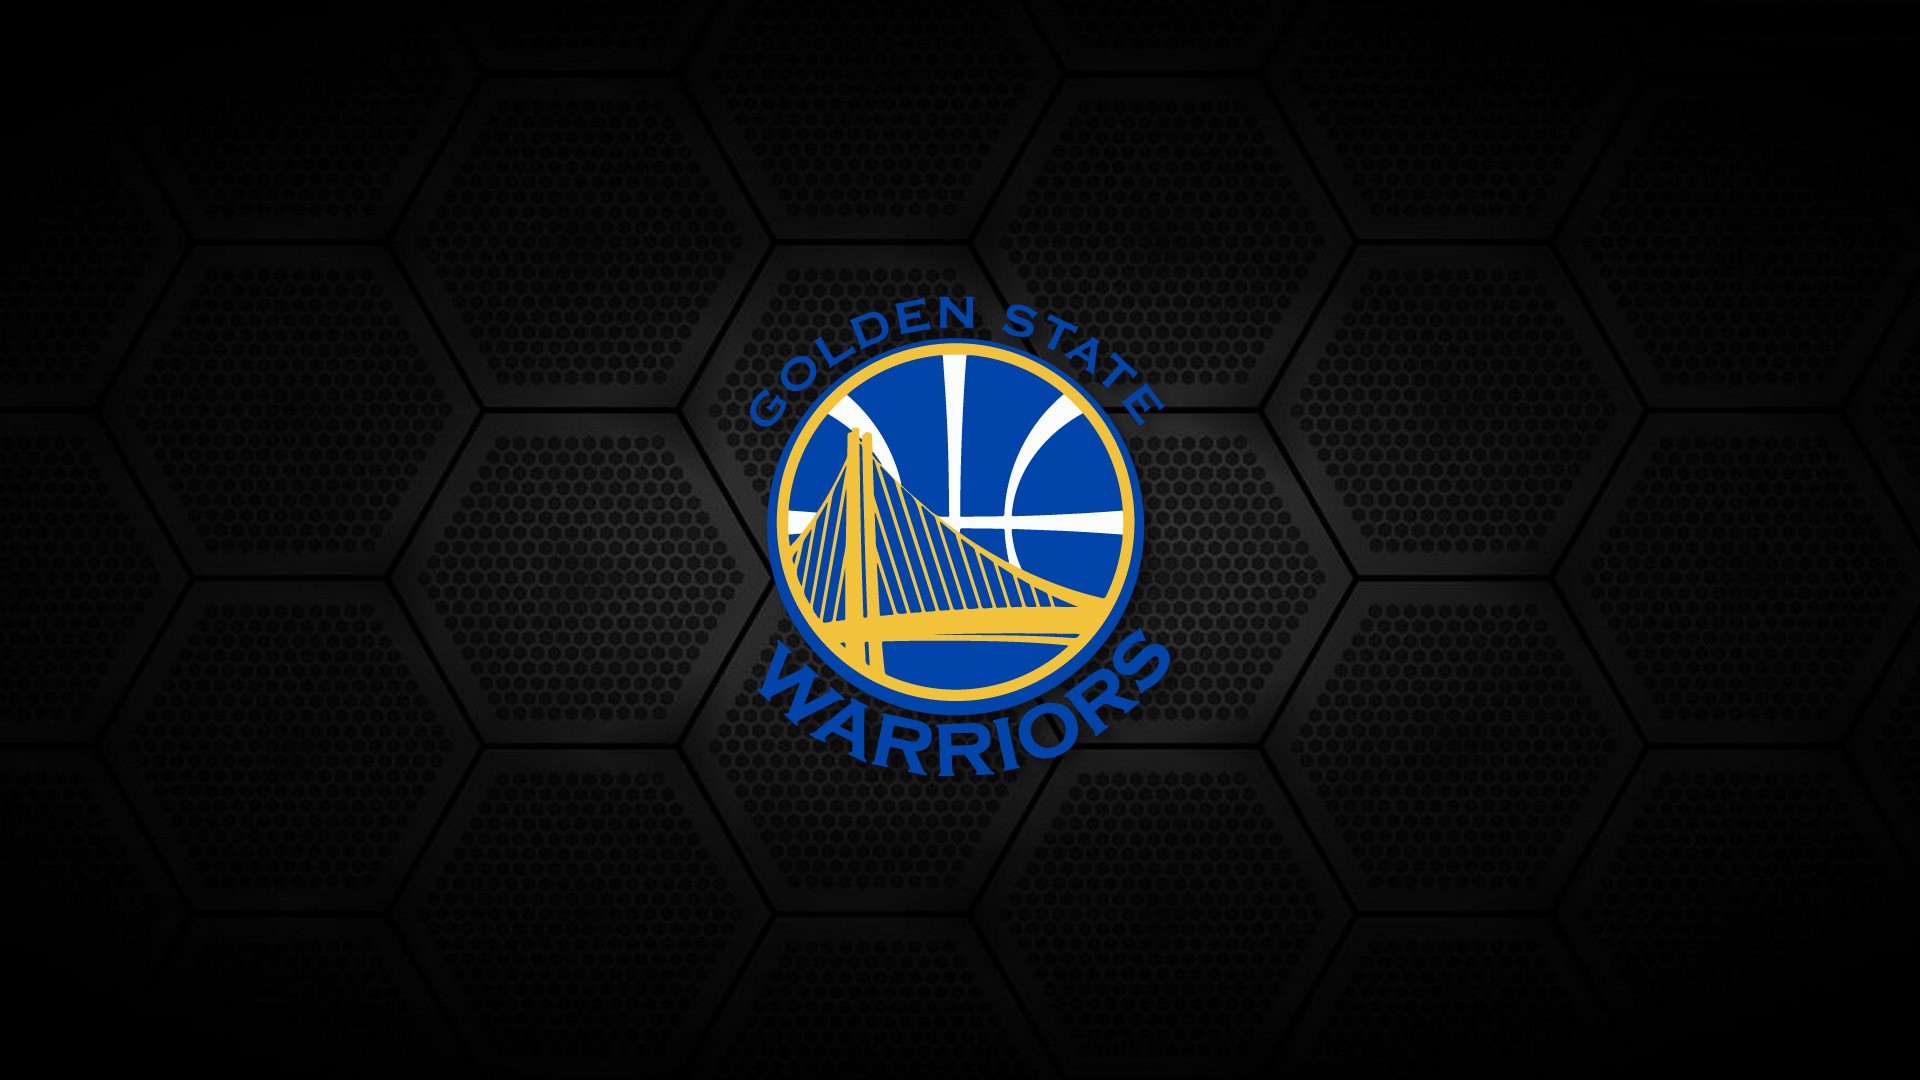 Golden State Warriors Logo For Mac Wallpaper with image dimensions 1920X1080 pixel. You can make this wallpaper for your Desktop Computer Backgrounds, Windows or Mac Screensavers, iPhone Lock screen, Tablet or Android and another Mobile Phone device